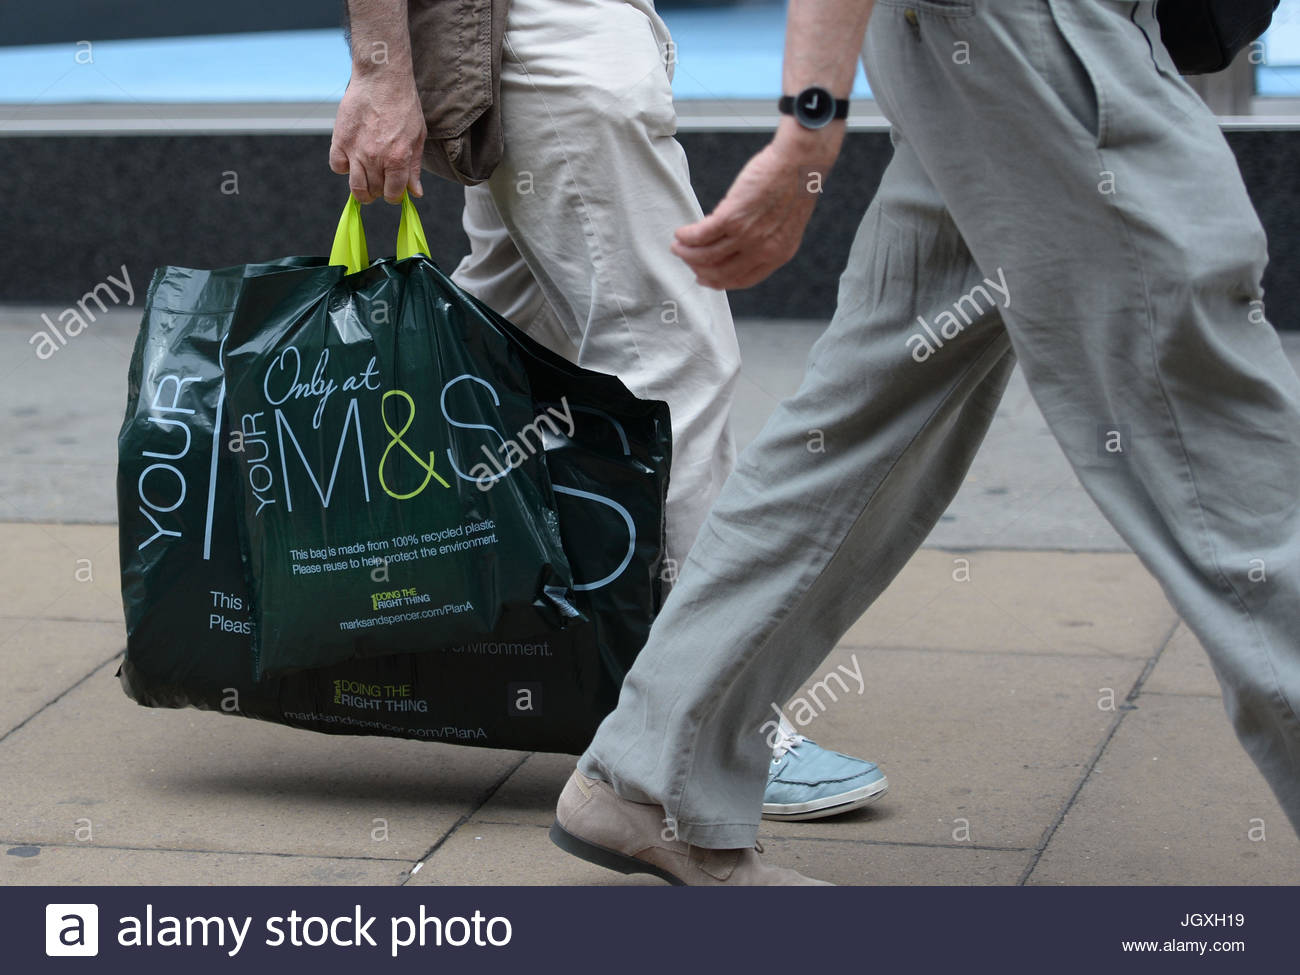 Marks And Spencer Bag Stock Photos & Marks And Spencer Bag Stock Images ...